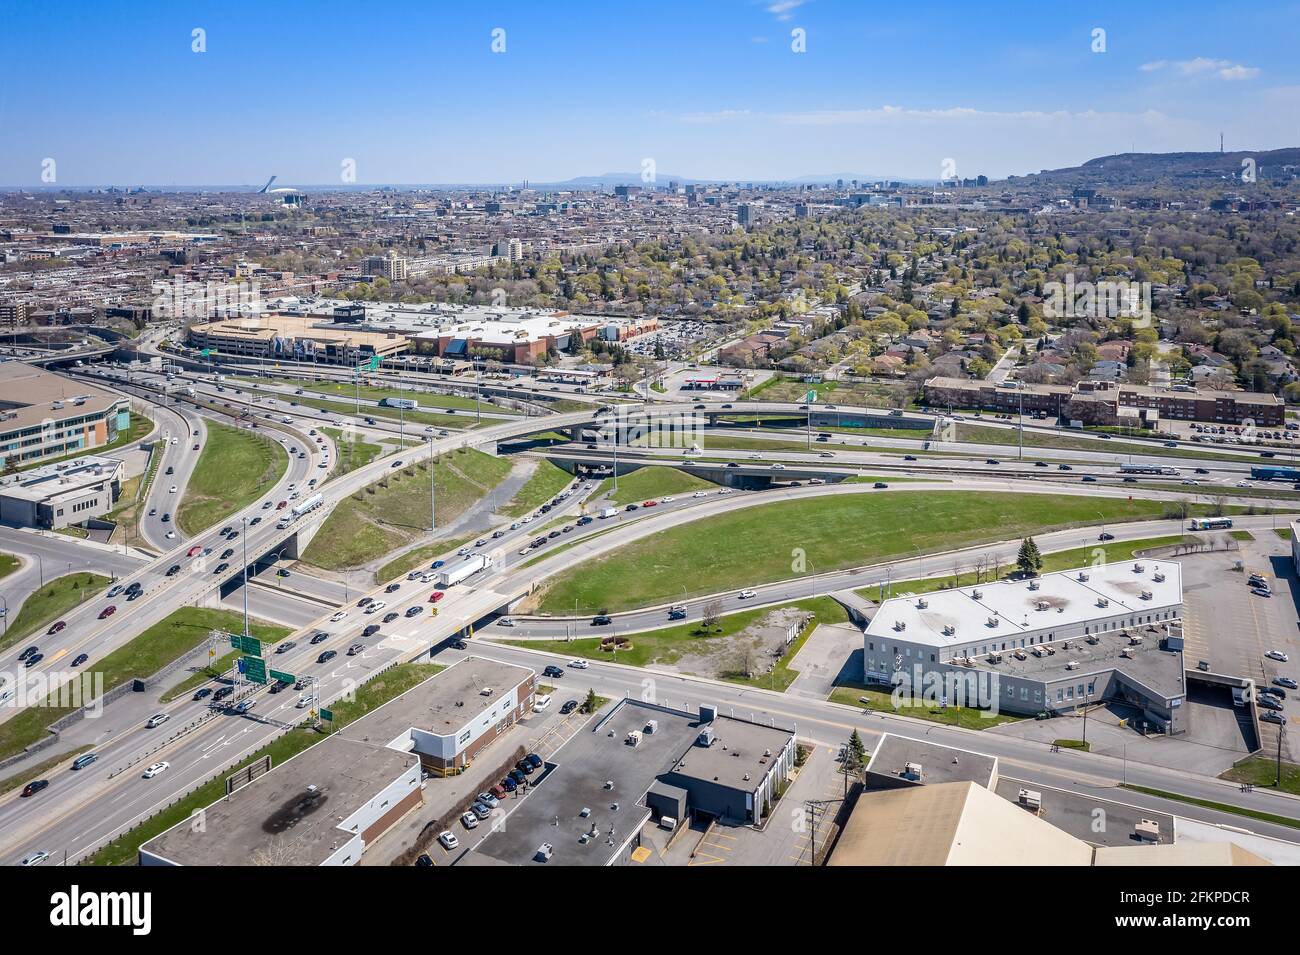 interchange between 15 and 40 in Montreal, aerial view Stock Photo